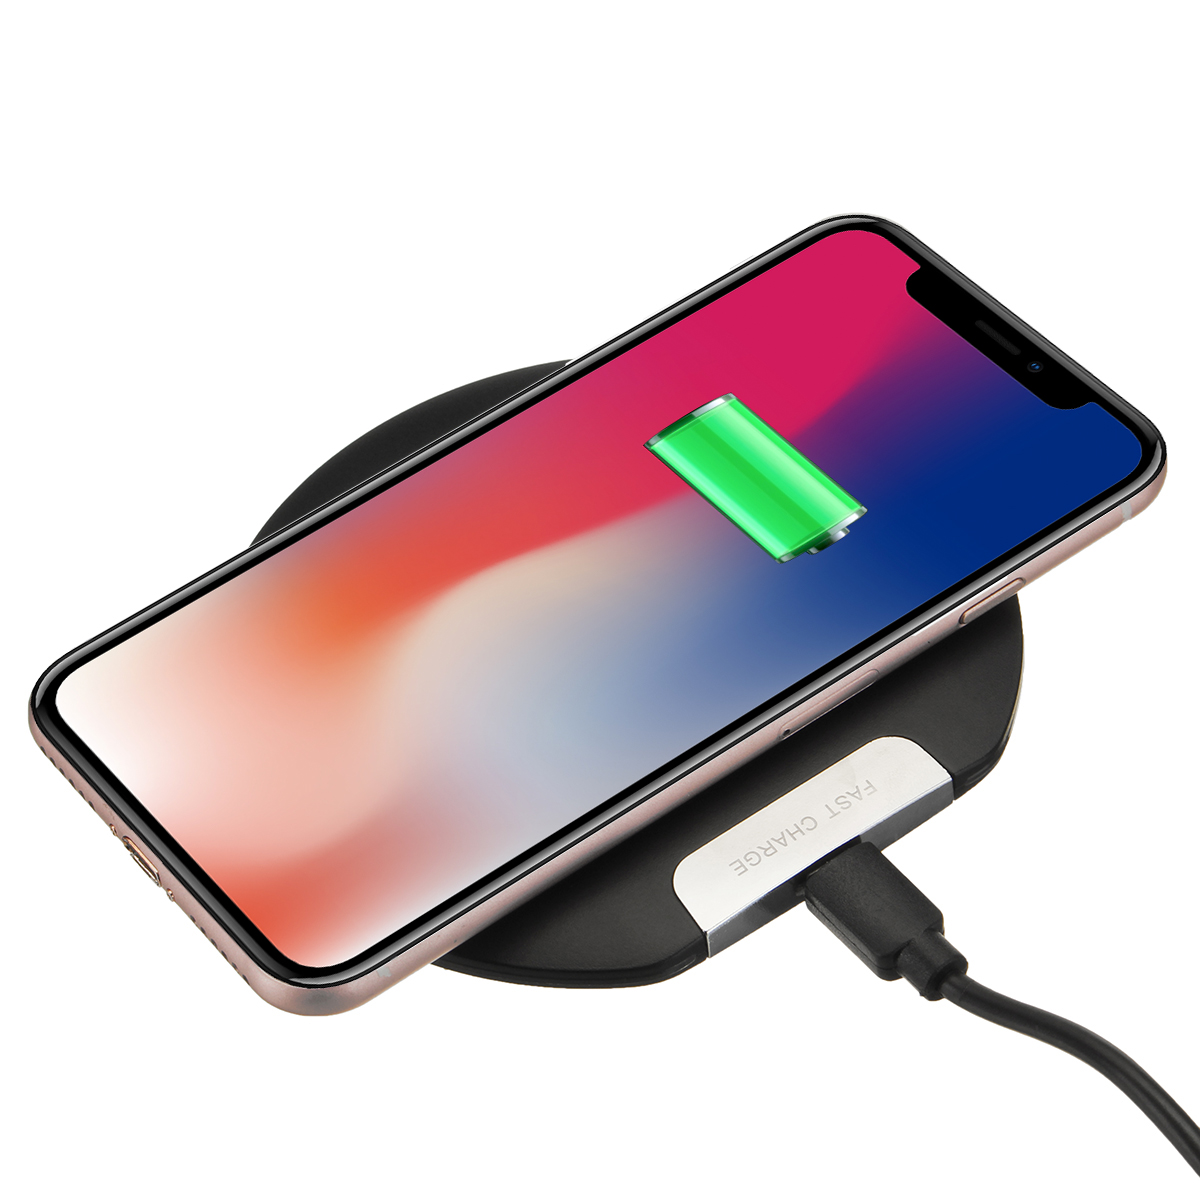 

Ultra Thin 10W Qi Wireless Charger Fast Charging Phone Holder For Qi-enabled Devices Samsung Galaxy S10 Plus iPhone XS Max Huawei P30 Pro Xiaomi Mi9